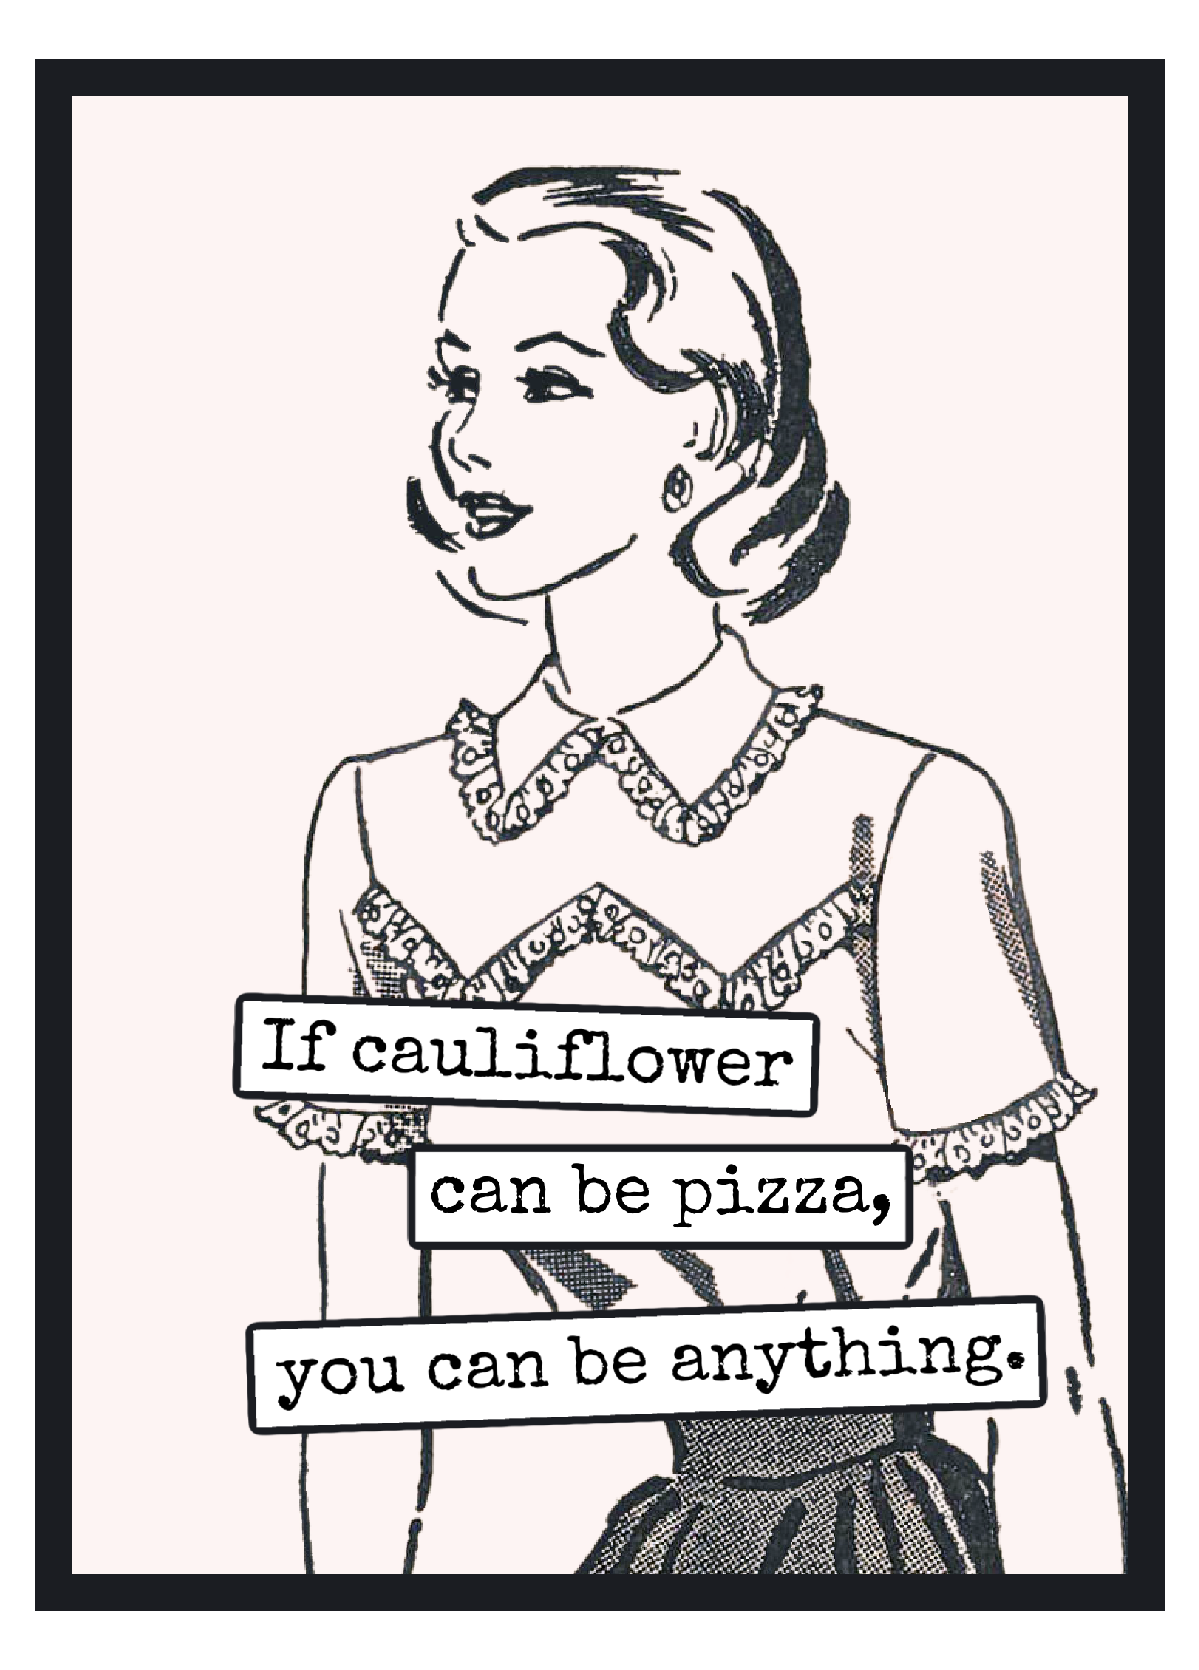 Raven's Rest Studio | Greeting Card - If Cauliflower Can Be Pizza, Then You Can Be...